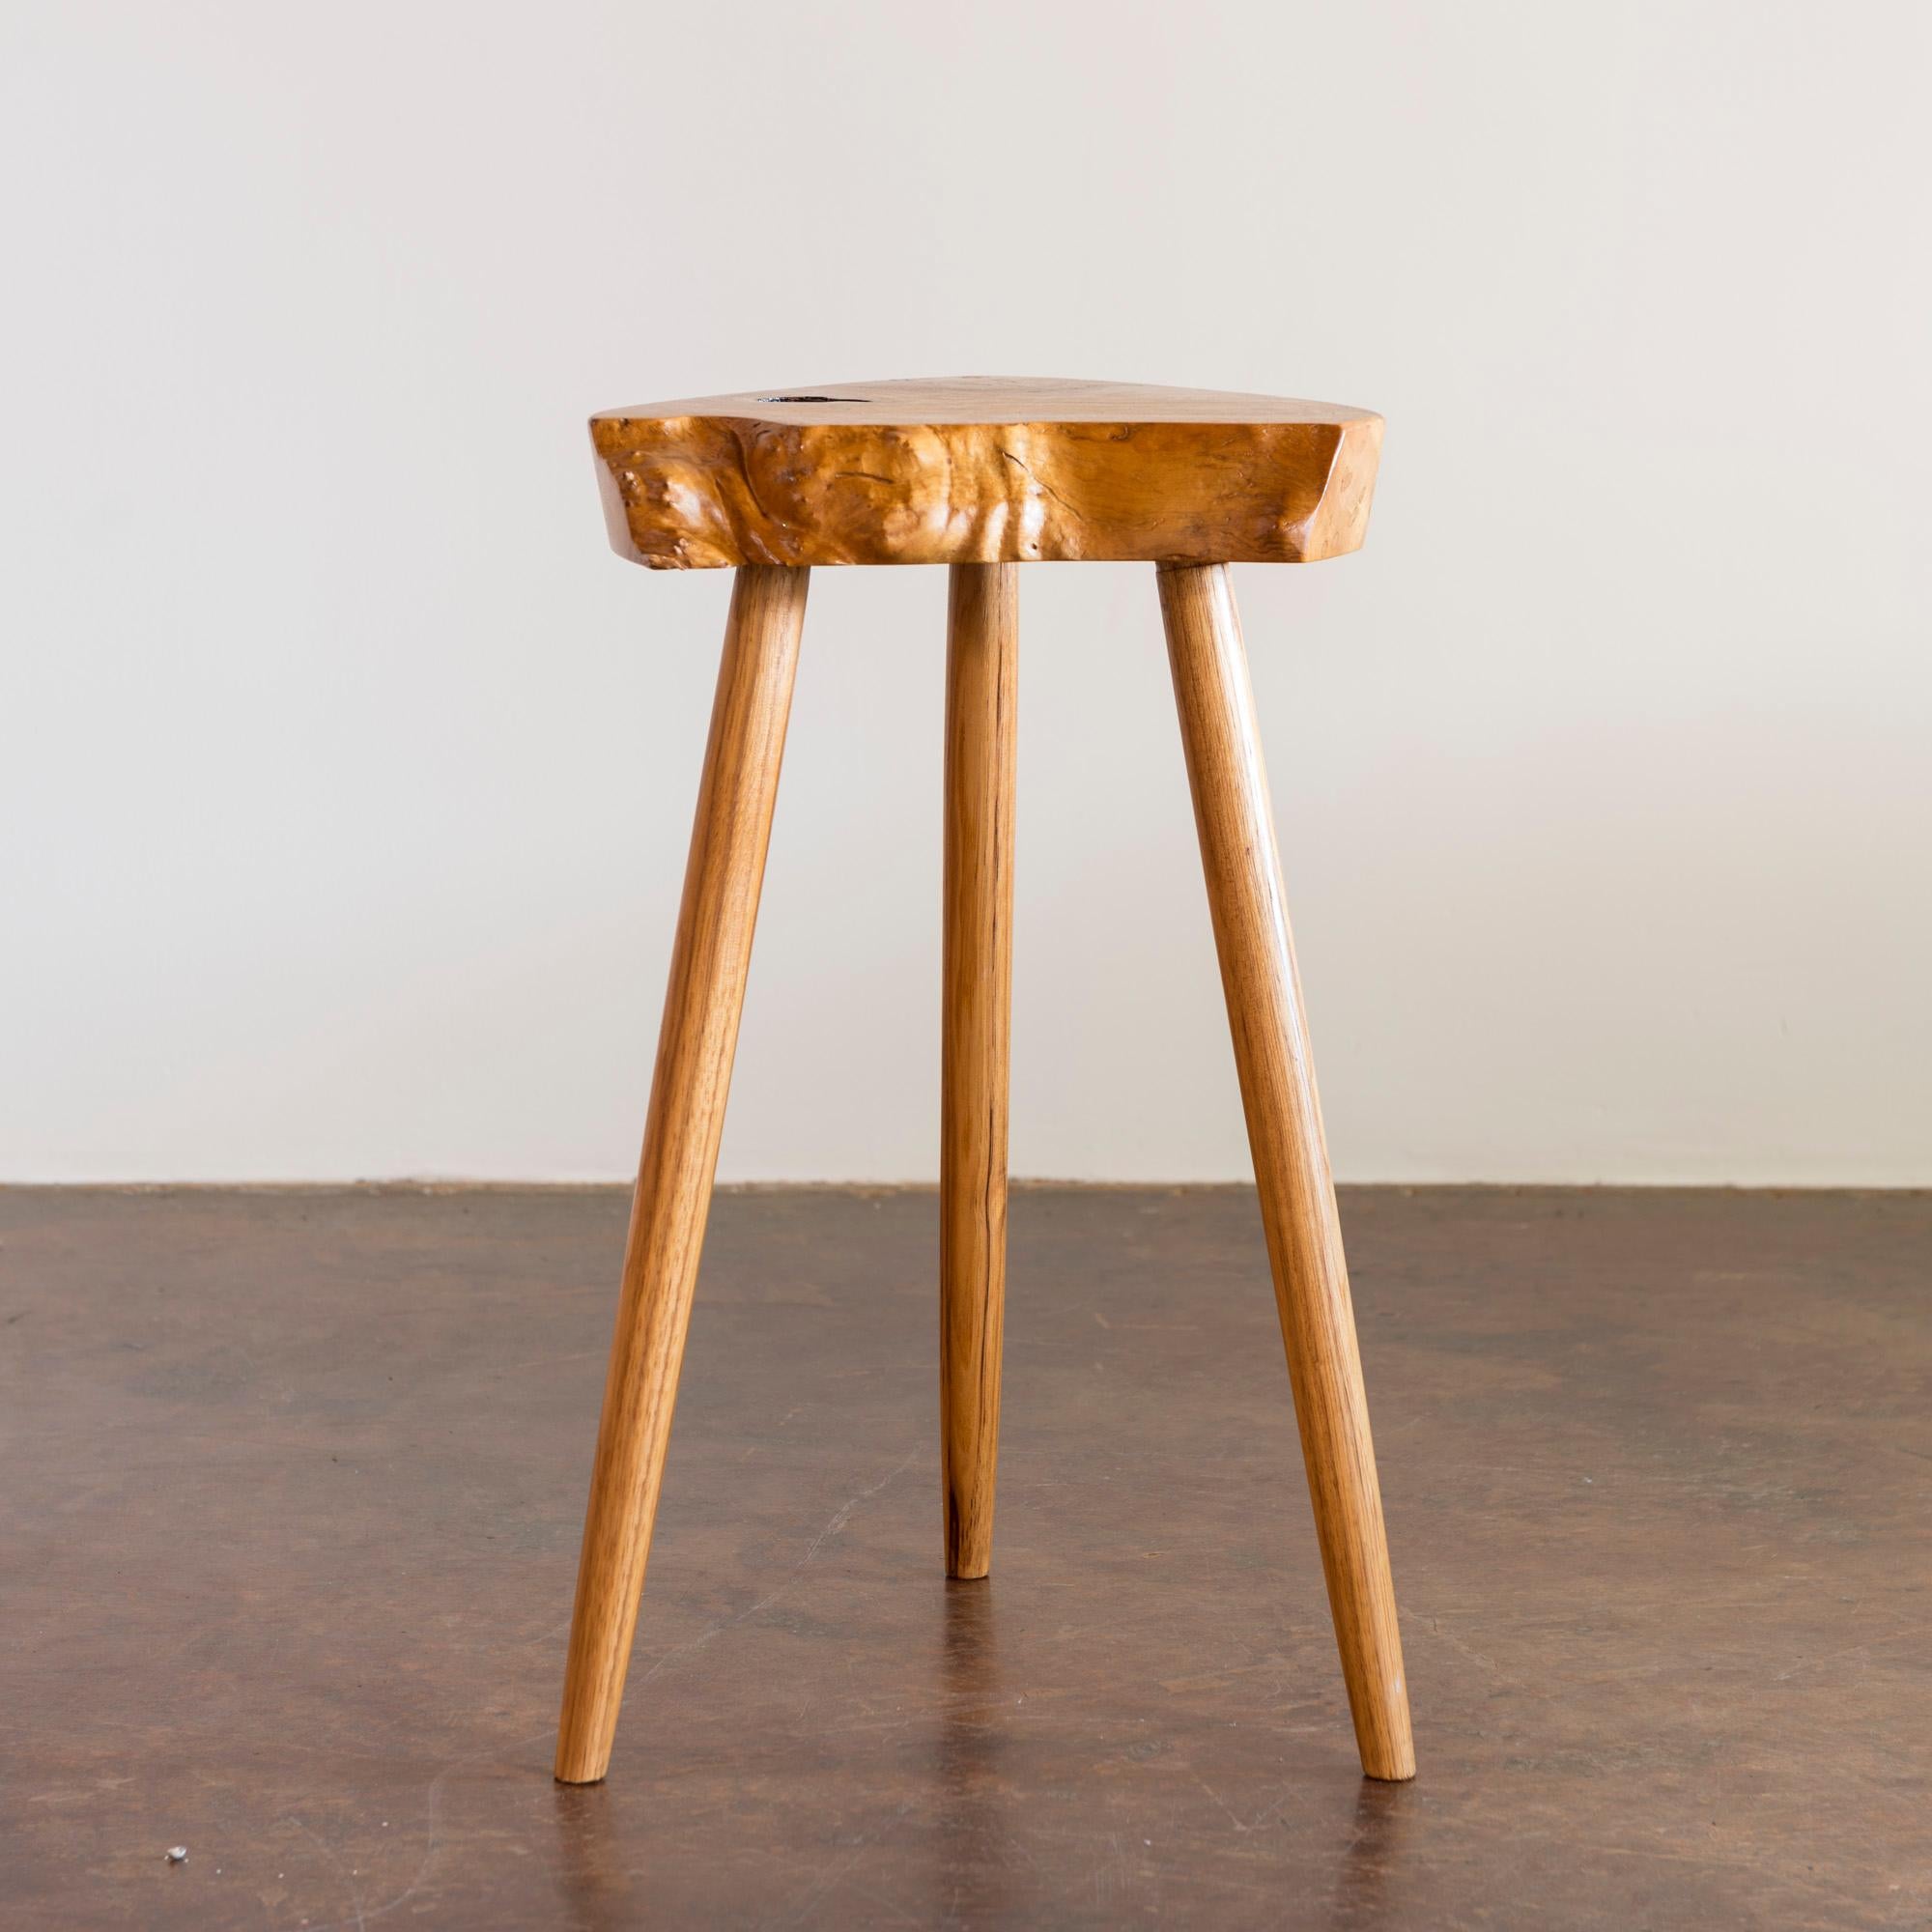 Petite, exceptionally proportioned early side table in ash featuring a triangular top with live edges and tapered legs.